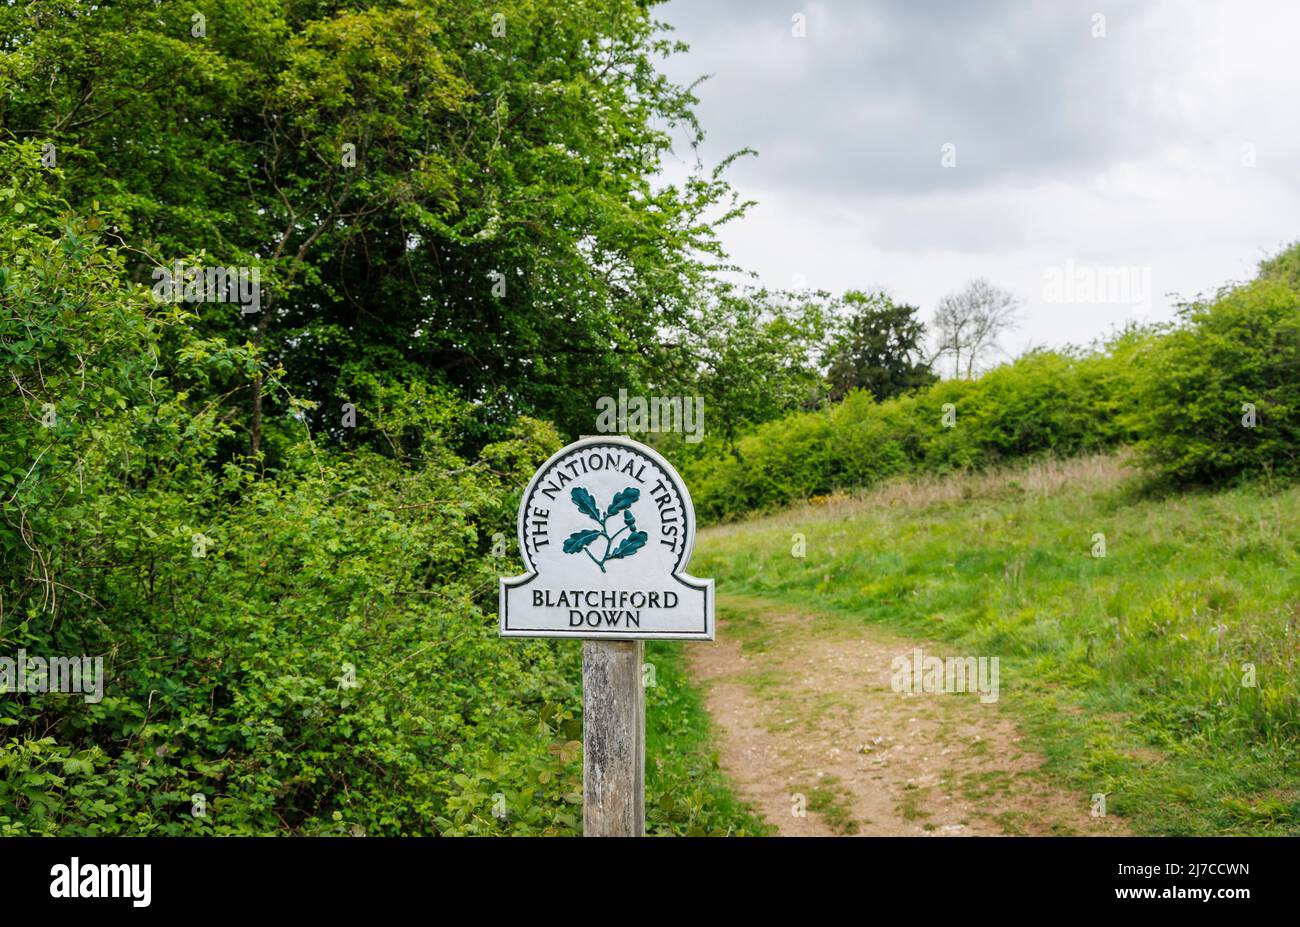 View of National Trust name sign at Blatchford Down on the North Downs Way, Abinger Hammer in the Surrey Hills Area of outstanding Natural Beauty Stock Photo